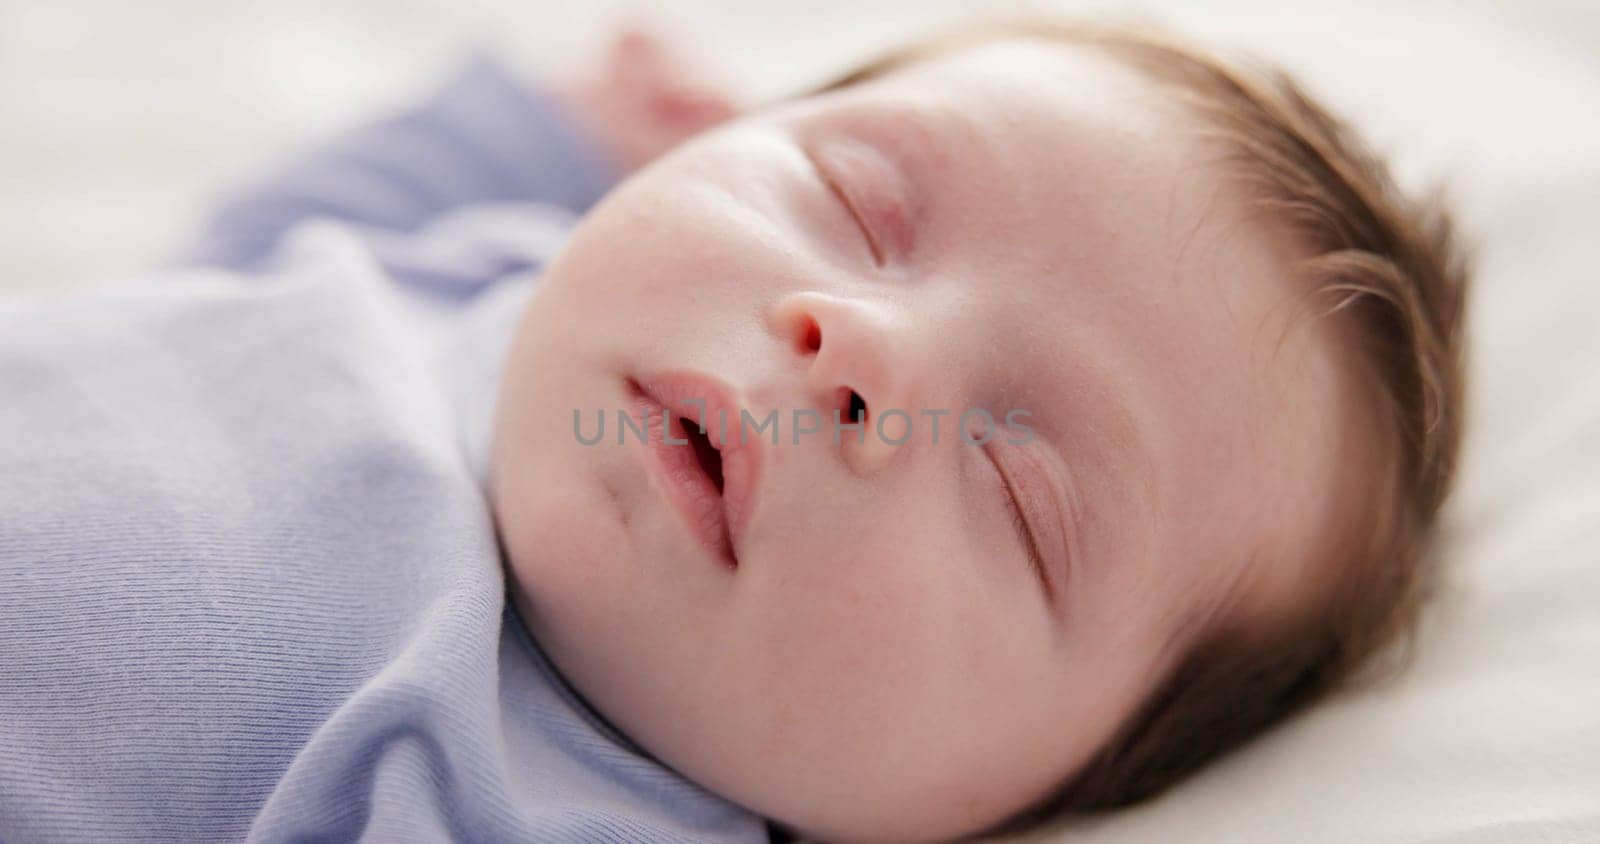 Face, relax and sleep with a baby on a bed closeup in a home, dreaming during a nap for child development. Growth, calm and rest with an adorable newborn infant asleep in a bedroom for comfort by YuriArcurs